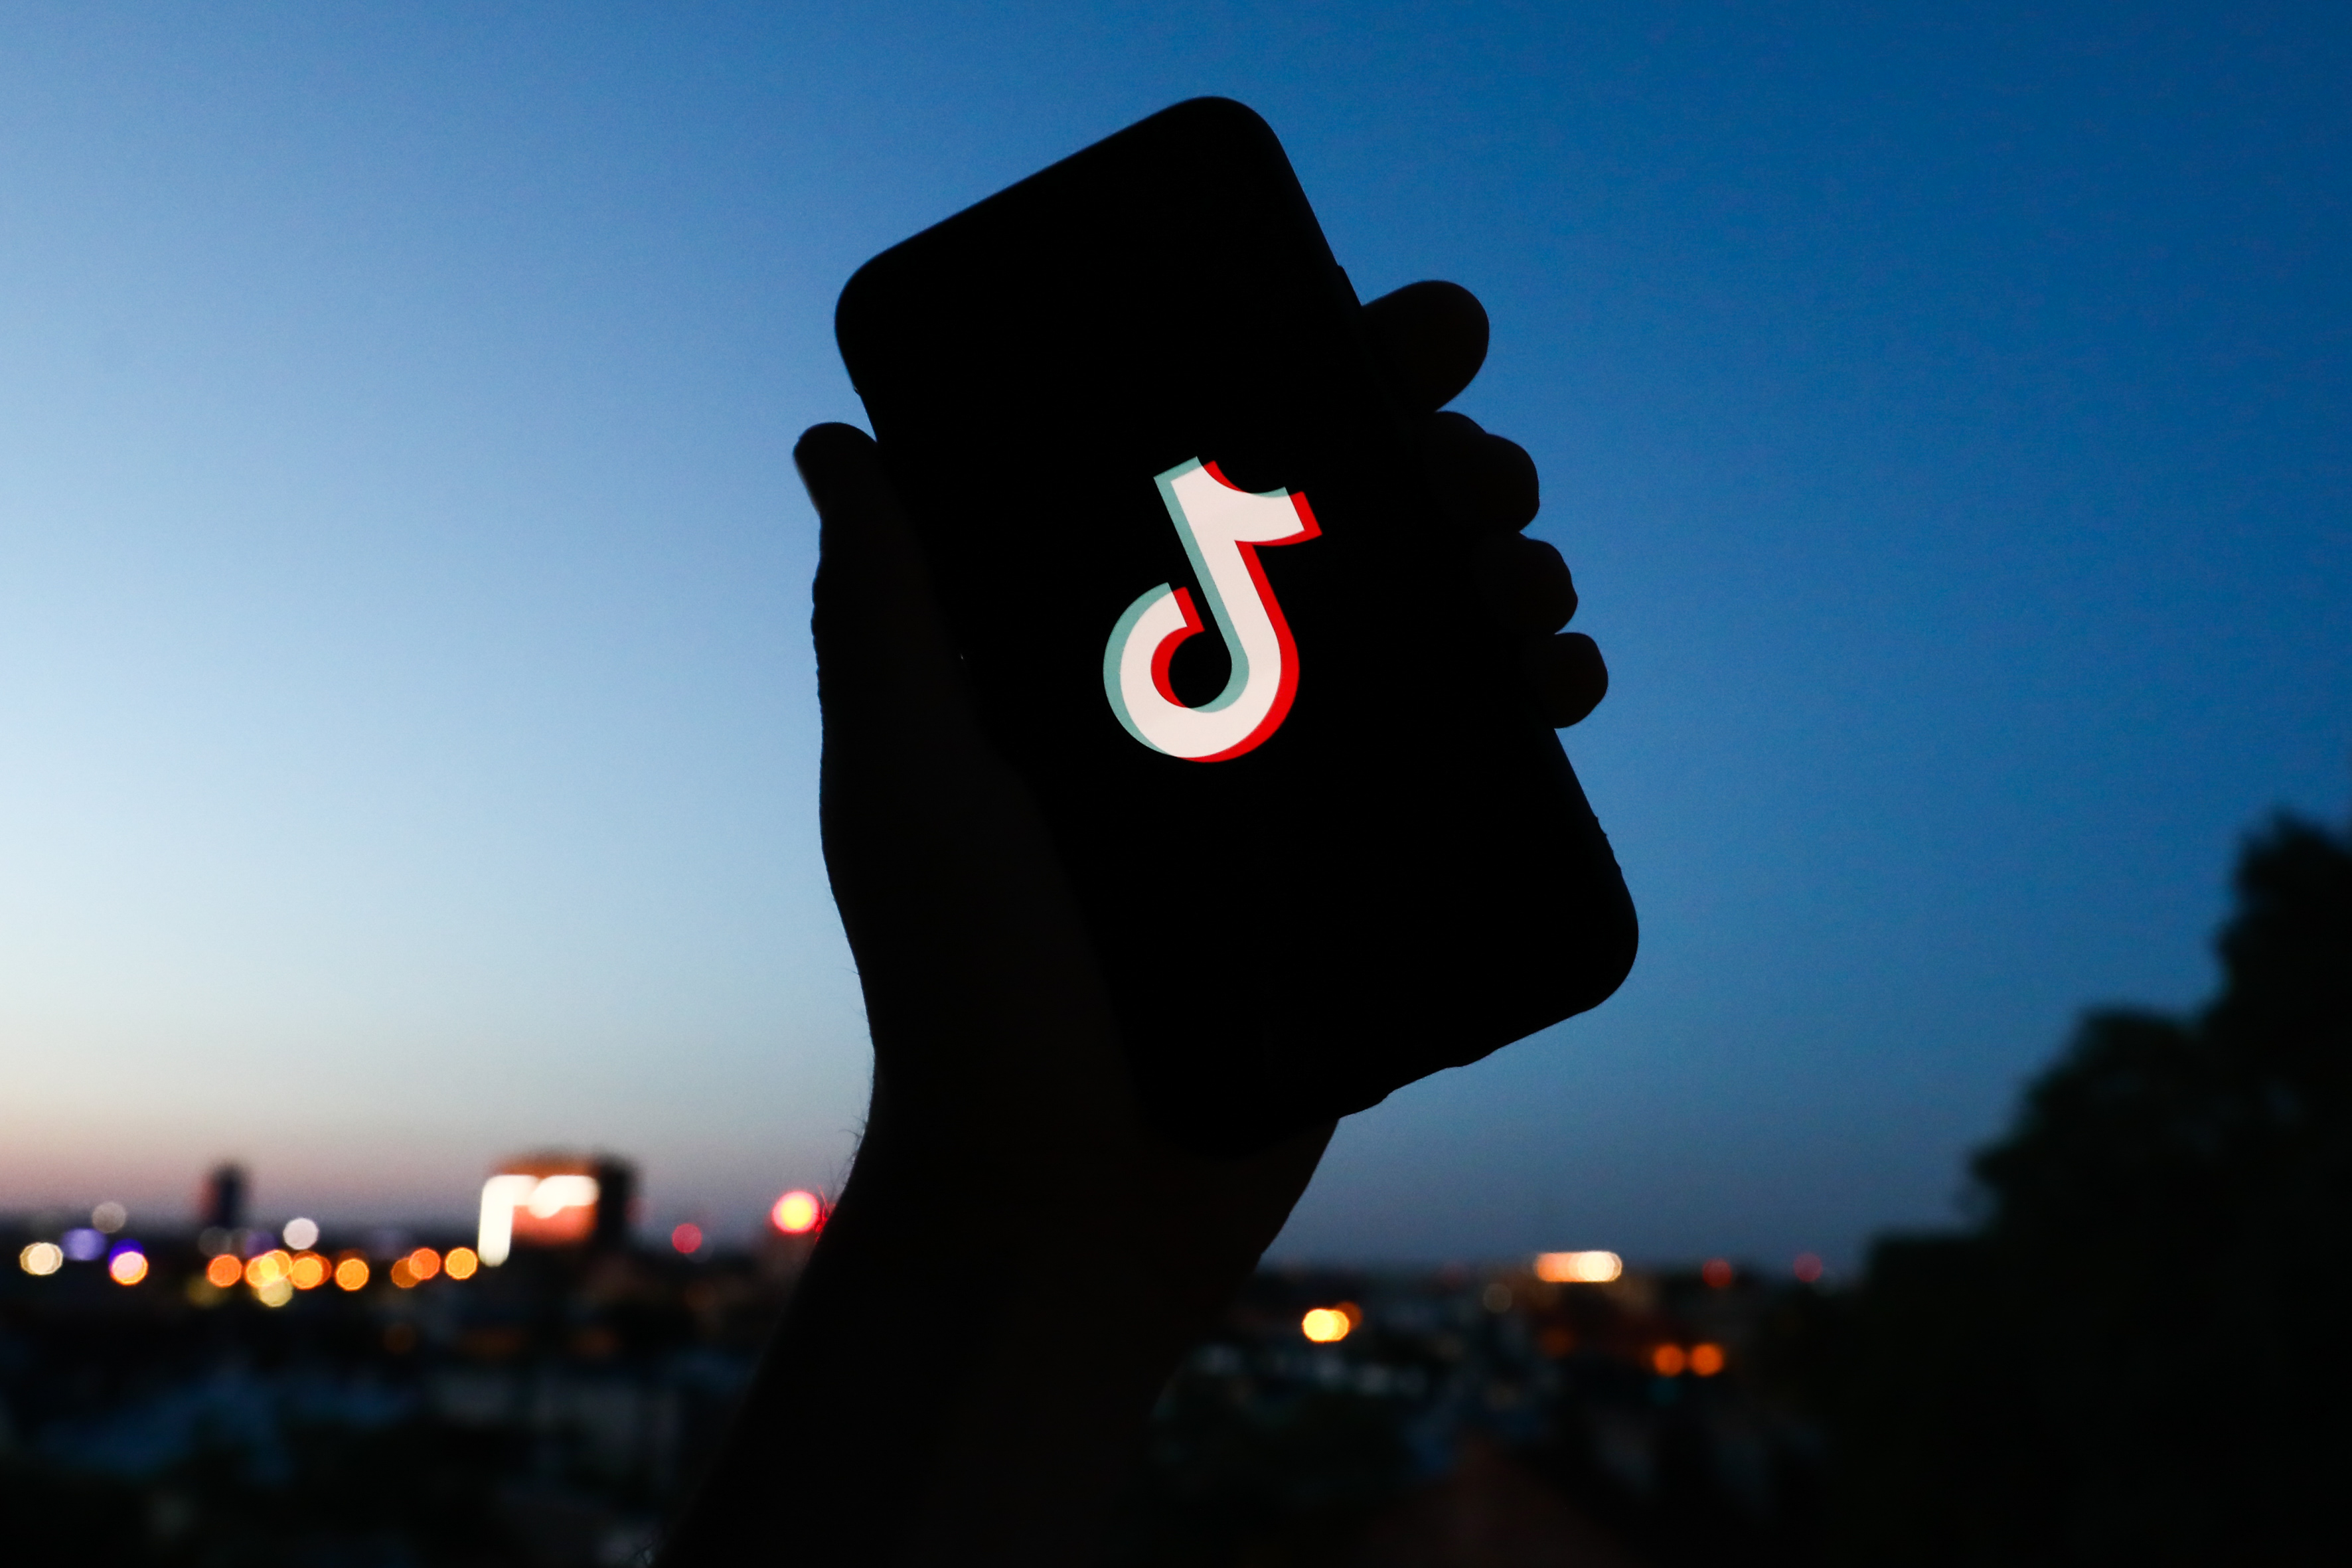 A hand holding up a phone with the TikTok logo on it.